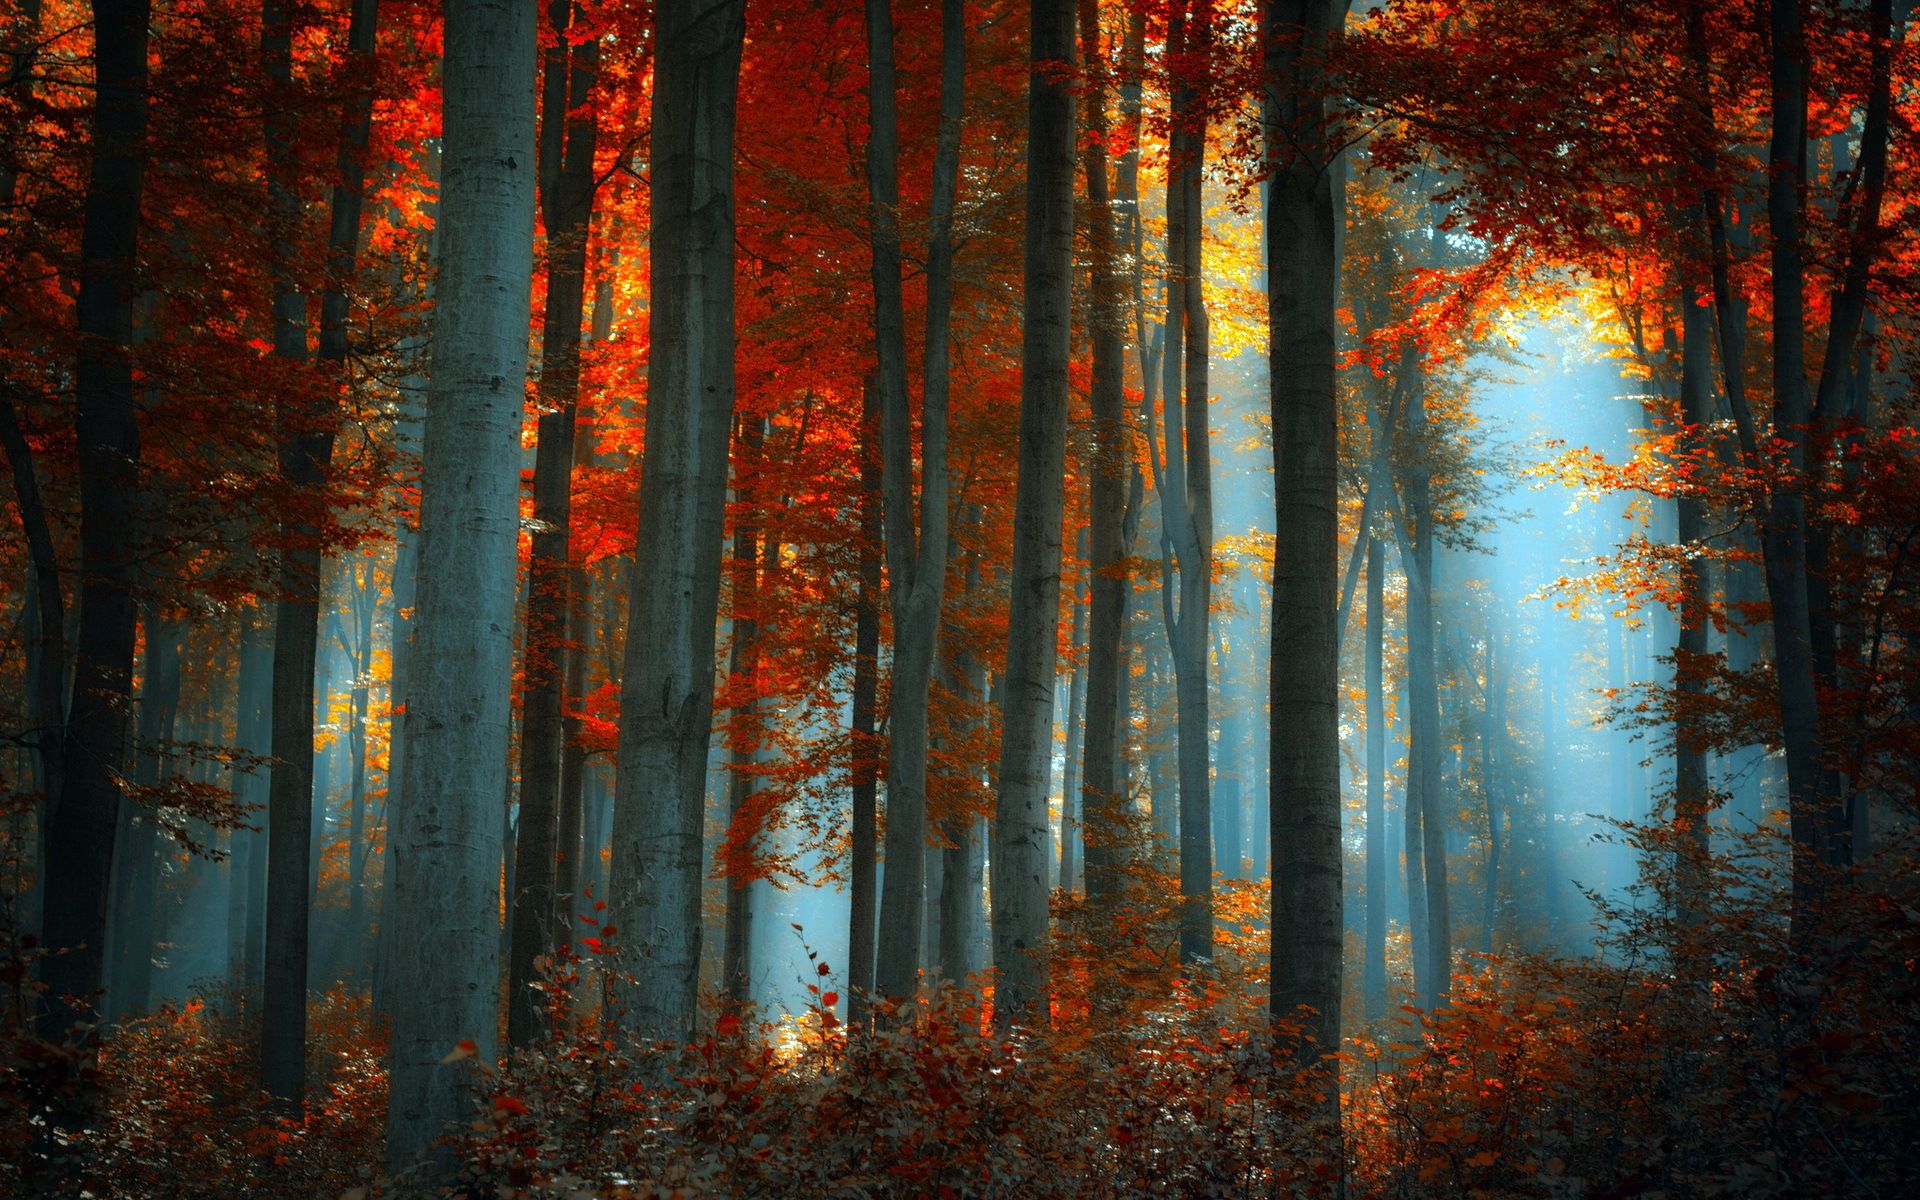 Fogy Orange Forest Wallpapers